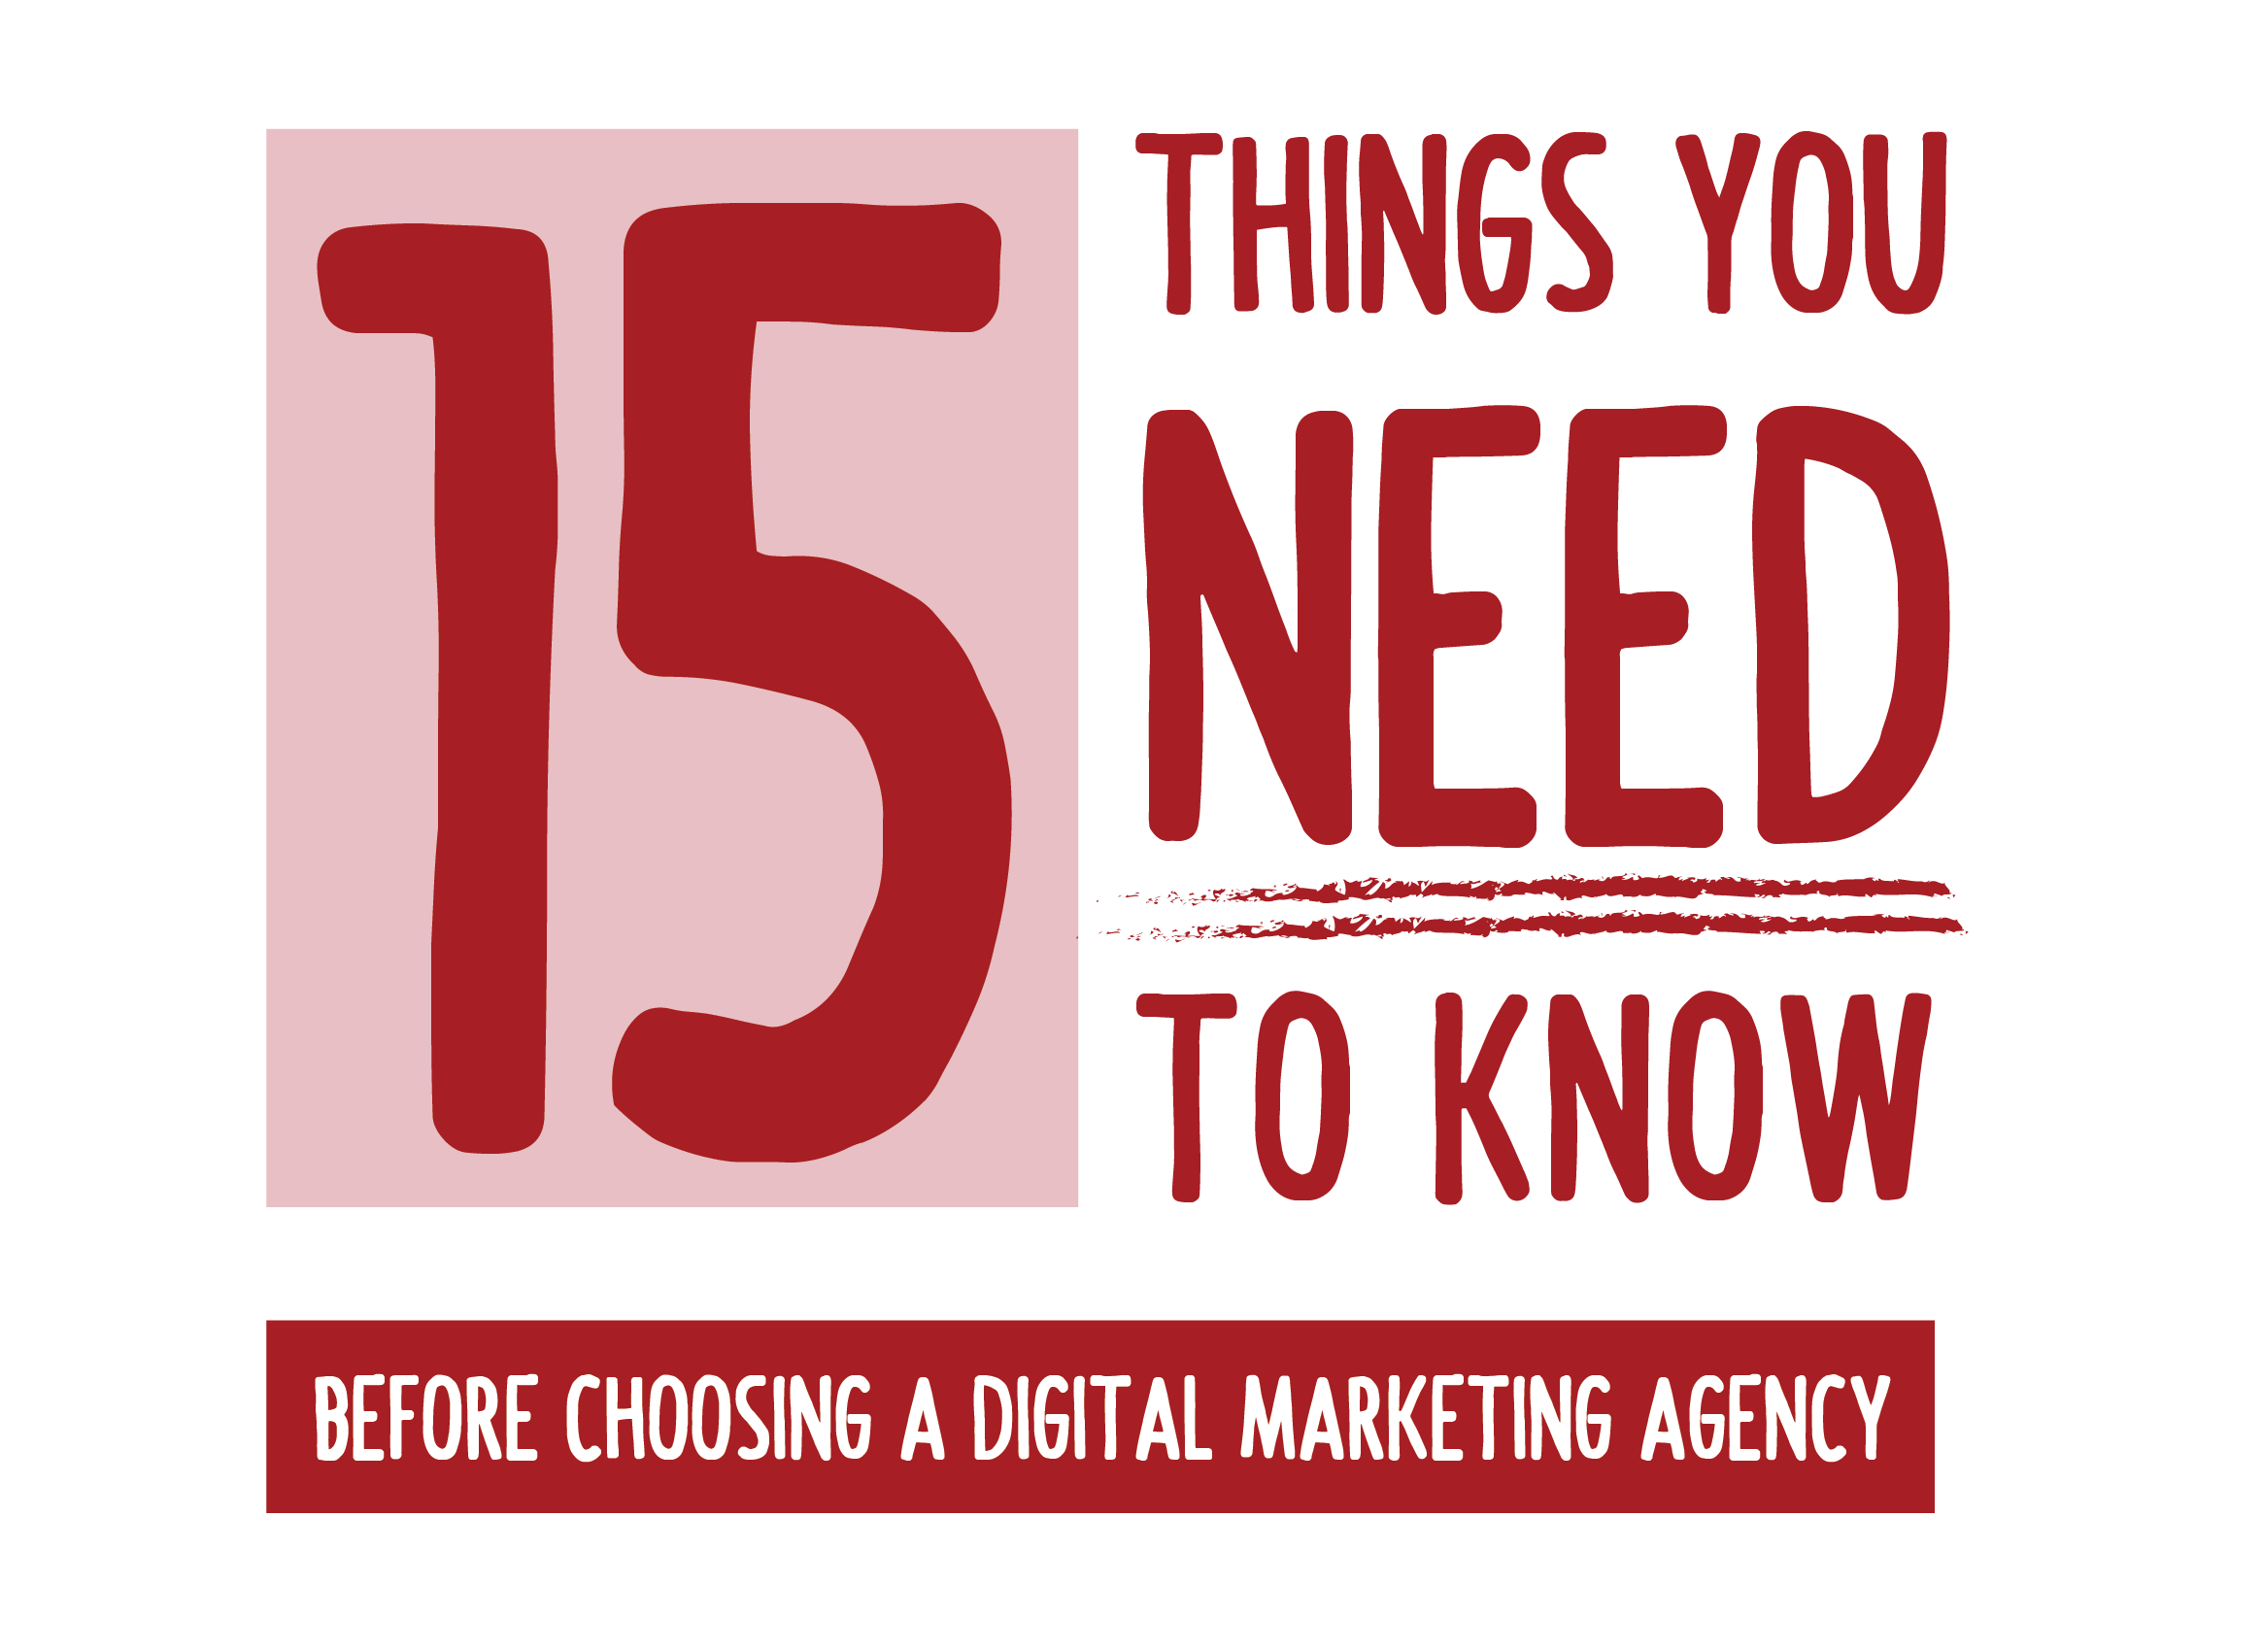 15 things you need to know before choosing a digital marketing agency